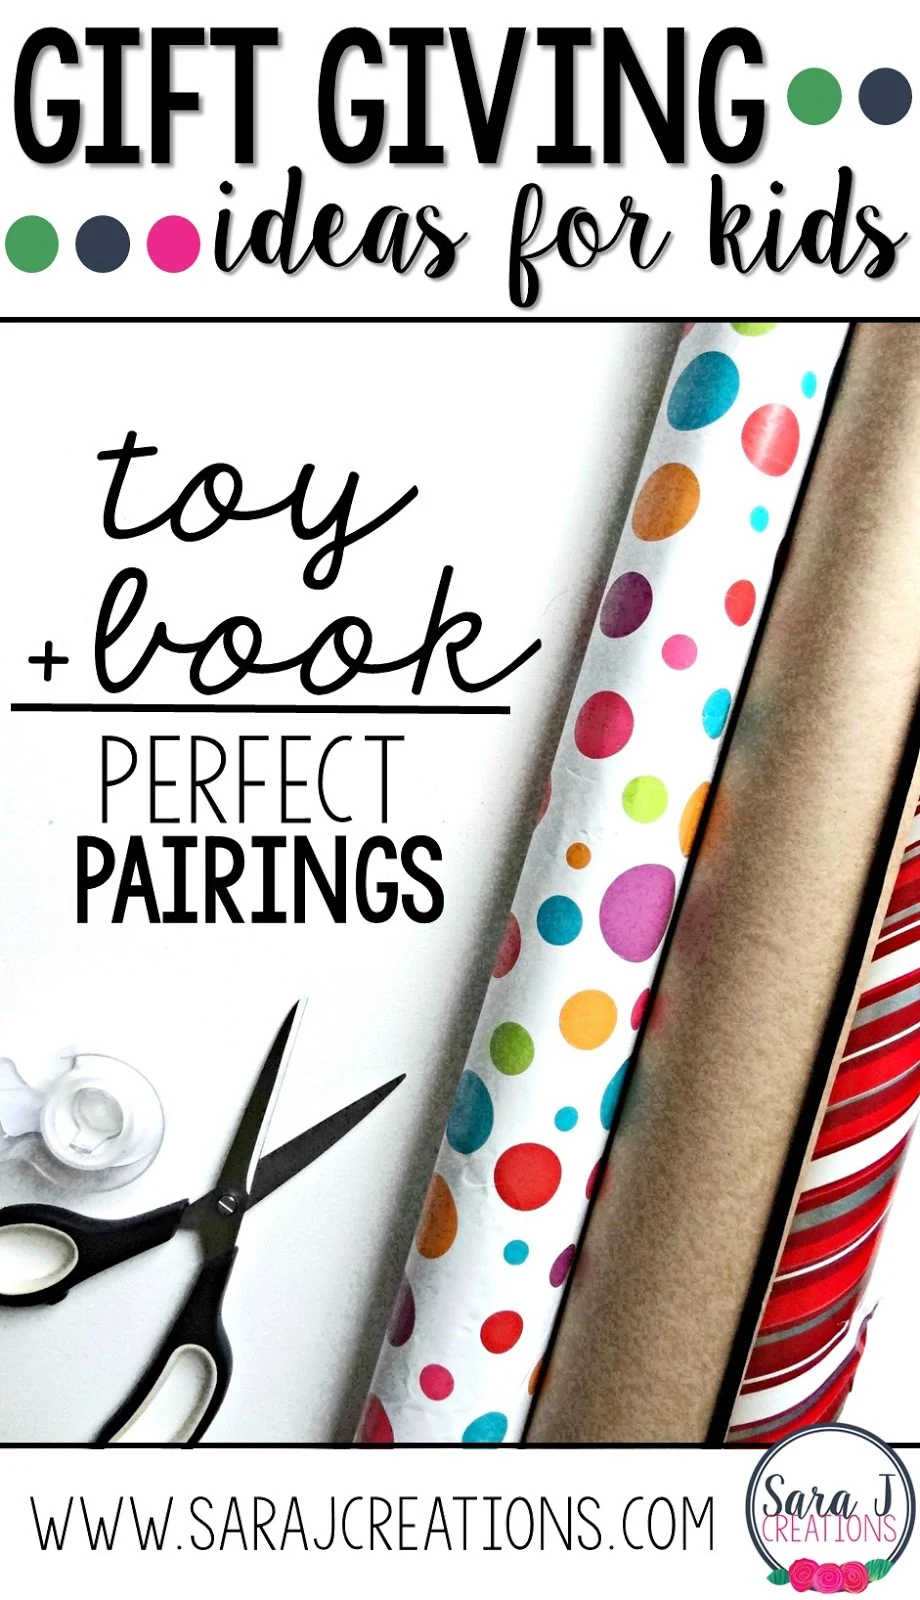 7 ideas for picture book and toy pairings to give as gifts for children